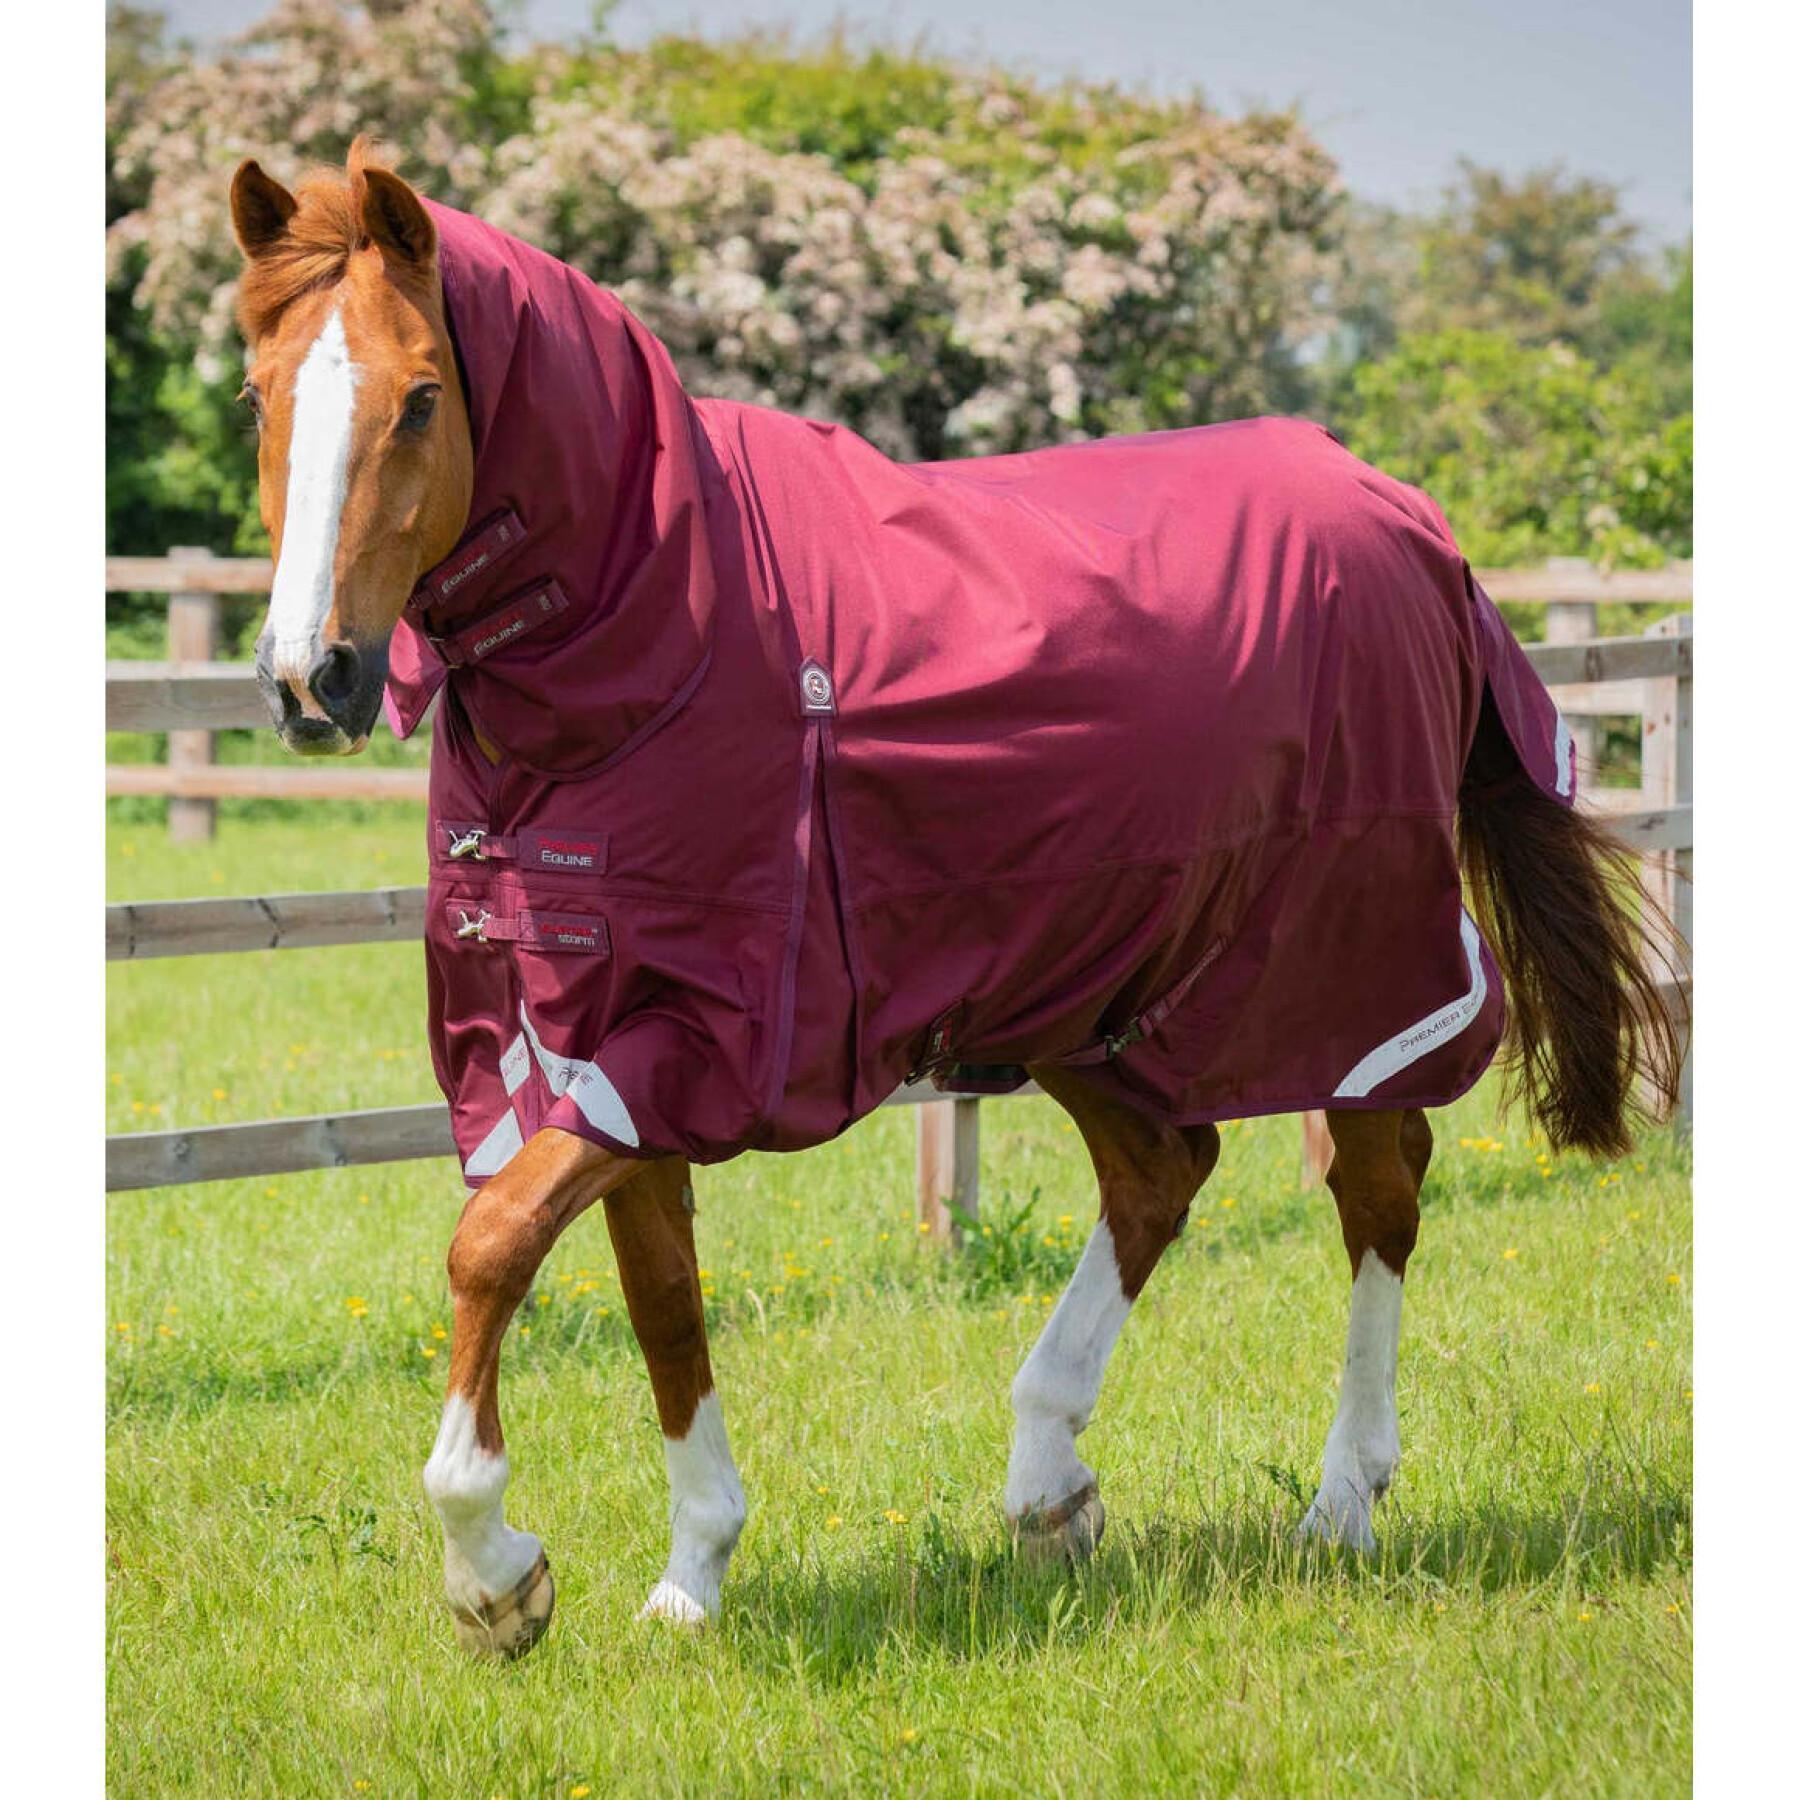 Waterproof outdoor horse blanket with neck cover Premier Equine Buster Storm Classic 90 g